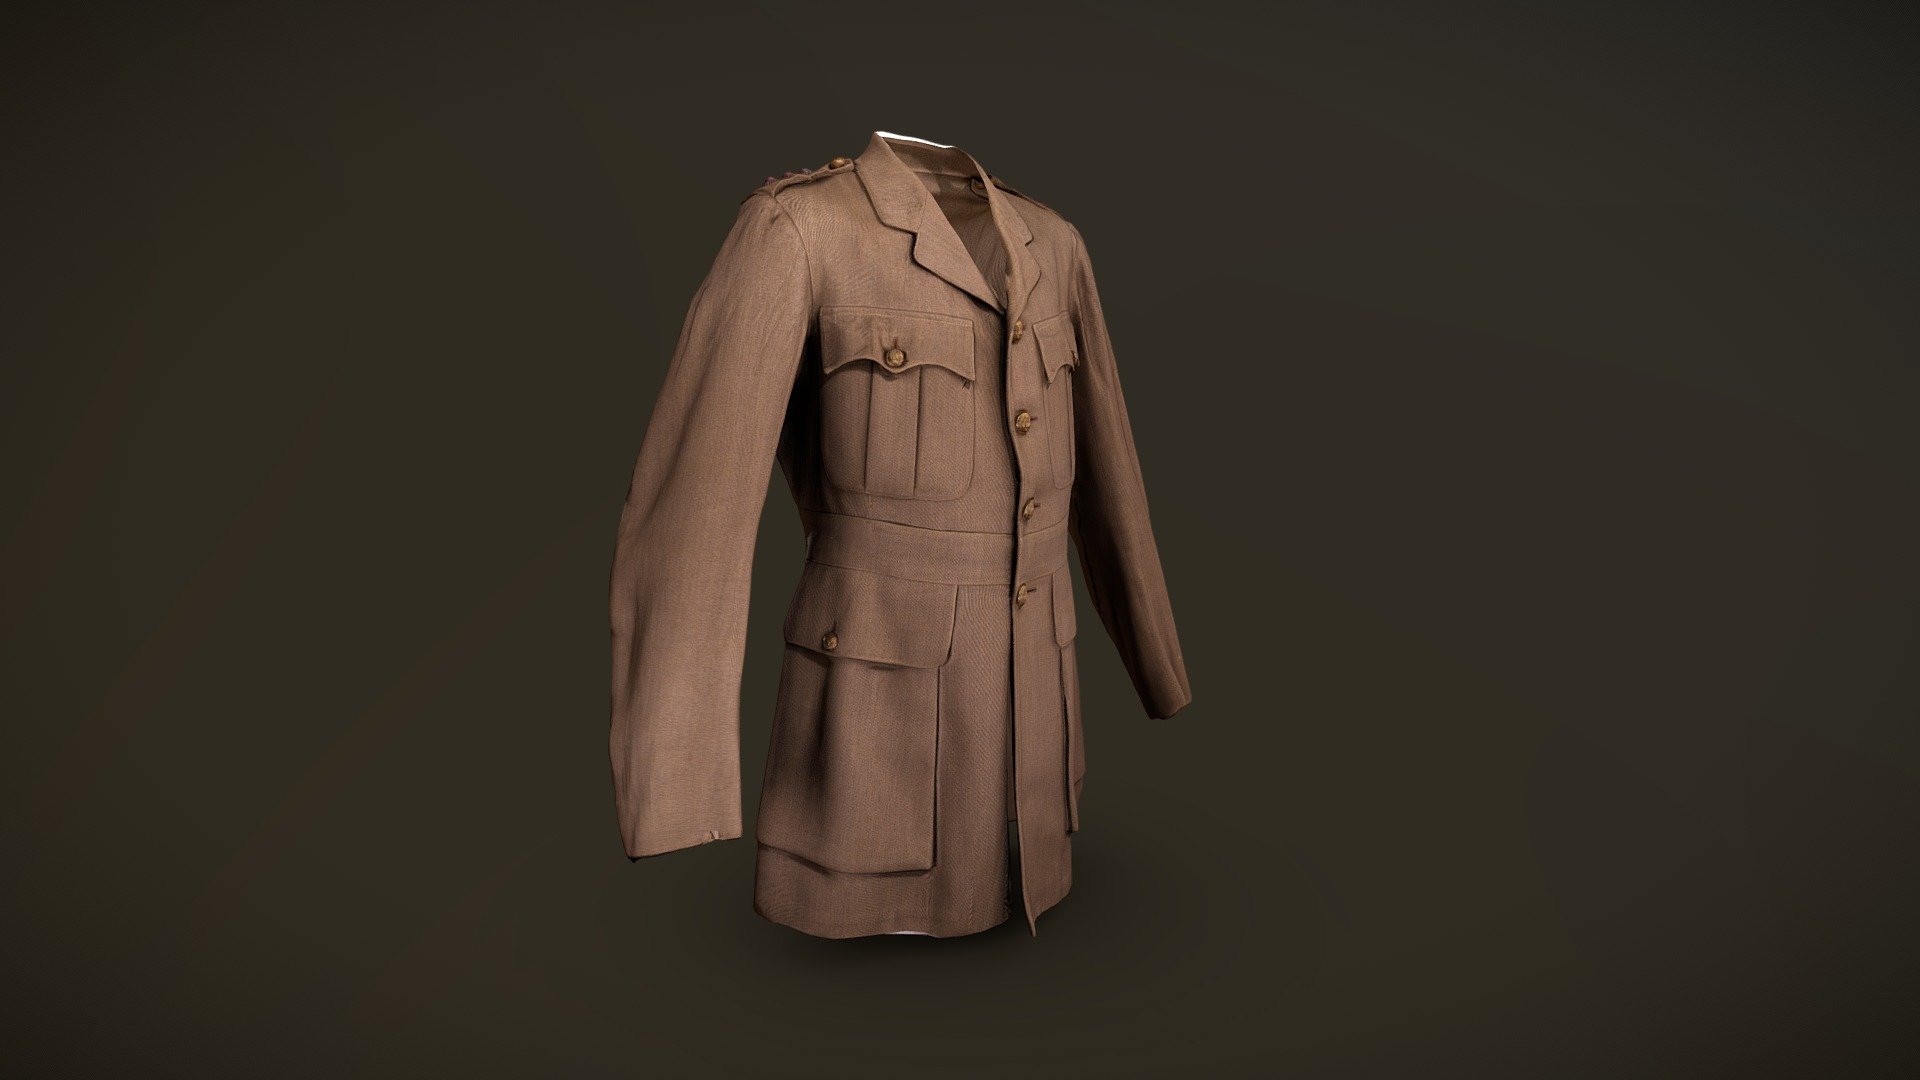 Belonging to Captain N.A. Quicke, WWI. Long, dark, Khaki green jacket, with there being 4 buttons lining the front of the jacket with the inscription “Duke of Cornwalls Light Infantry.” There are 5 pockets lining the front of the coat, 2 on either hip and 2 on either breast, all of which fasten with the same regimental buttons (with the one on the left hip being incredibly weathered to the point it is not distinguishable.) the 5th pocket is a concealed welt pocket that is within the belt band. There are 2 belt hooks on the back of wither hip and a large slit up the back of the garment to help aid movement. The jacket has been well worn, but looked after, evident through the inside lining on either arm pit.

This item originates from the collection at Bodmin Keep Musuem, Cornwall, UK. The model was created by Purpose3D. If you are interested in purchasing the model, please get in touch with Purpose 3D 3d model